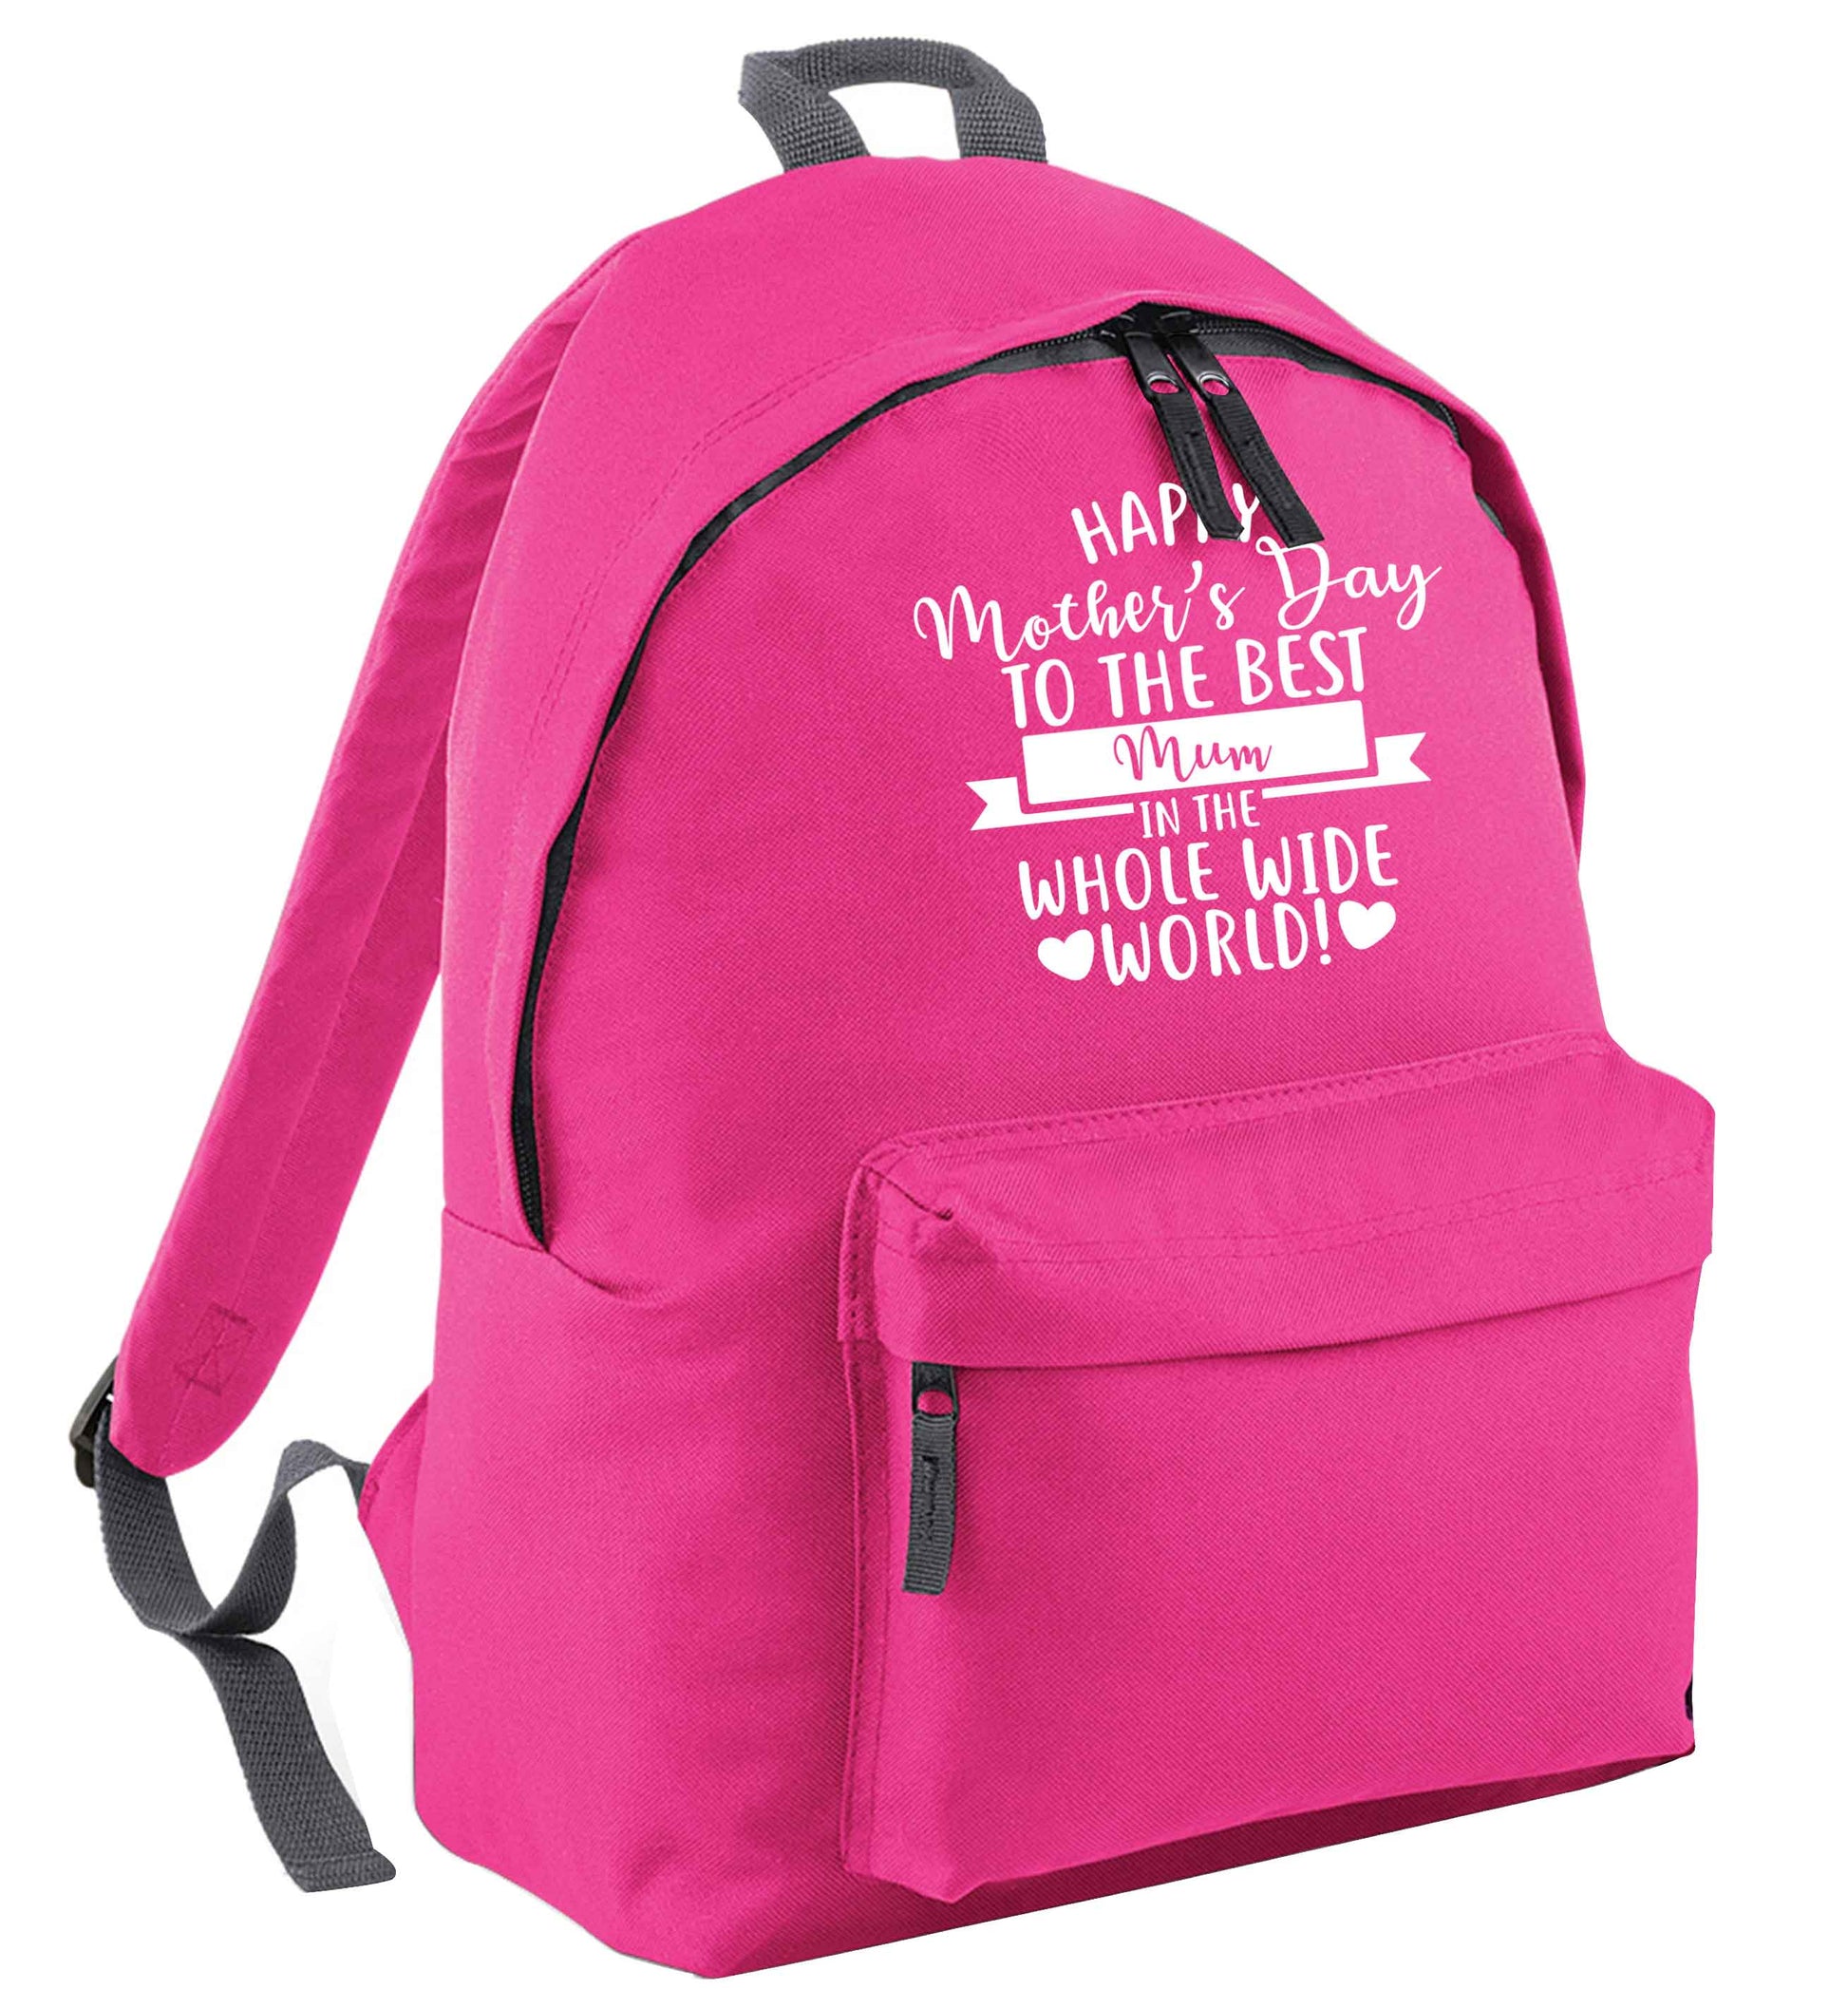 Happy mother's day to the best mum in the world pink adults backpack